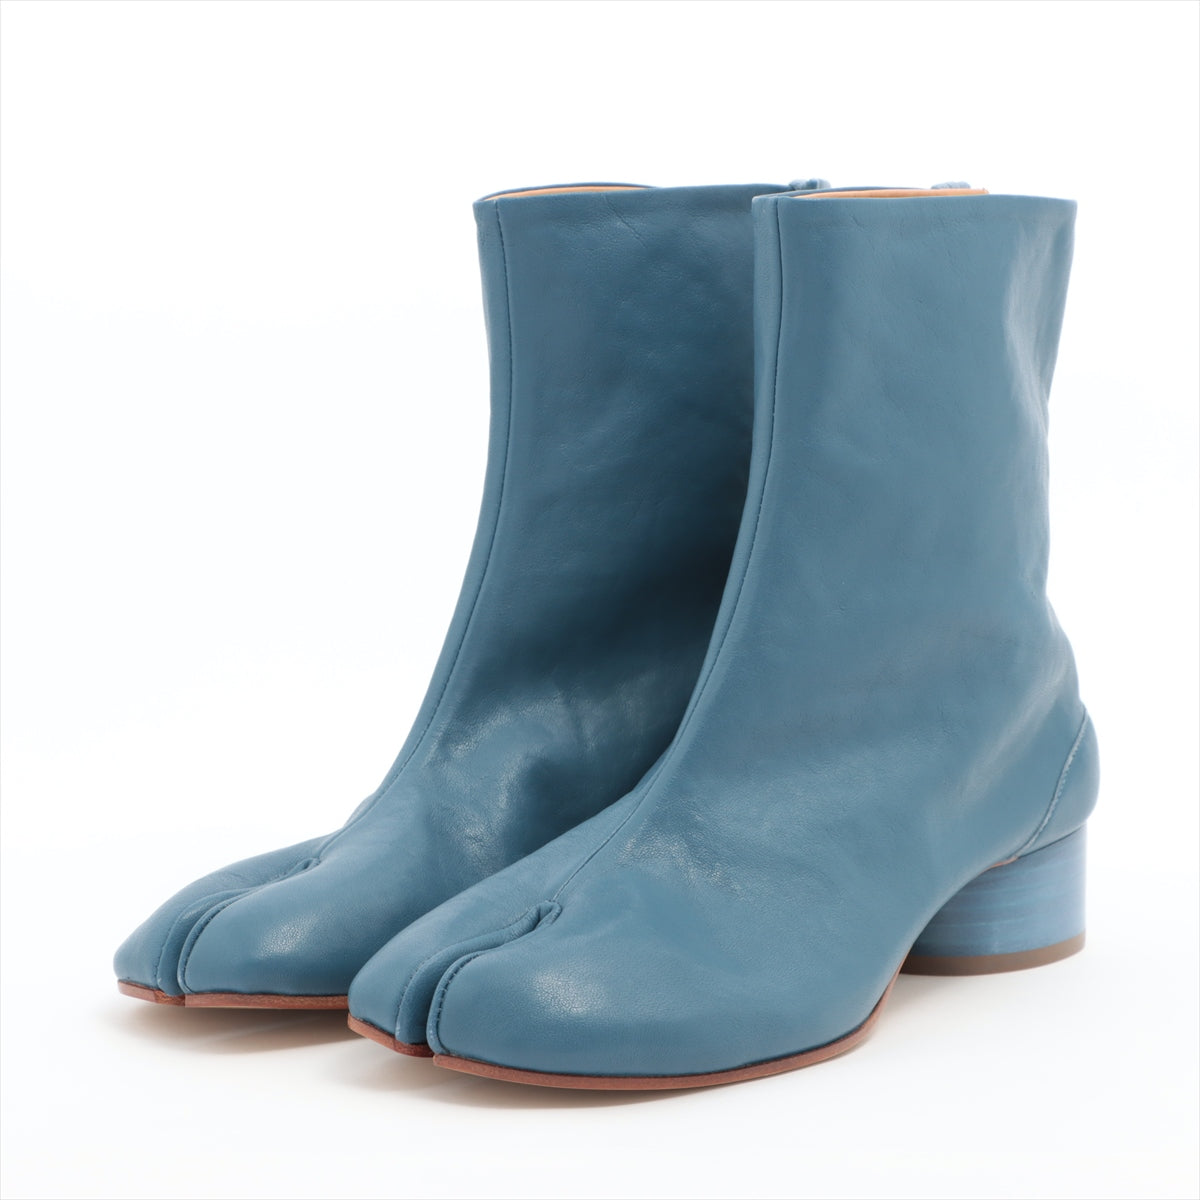 Maison Margiela TABI Leather Short Boots 40 Ladies' Blue 22 box There is a bag